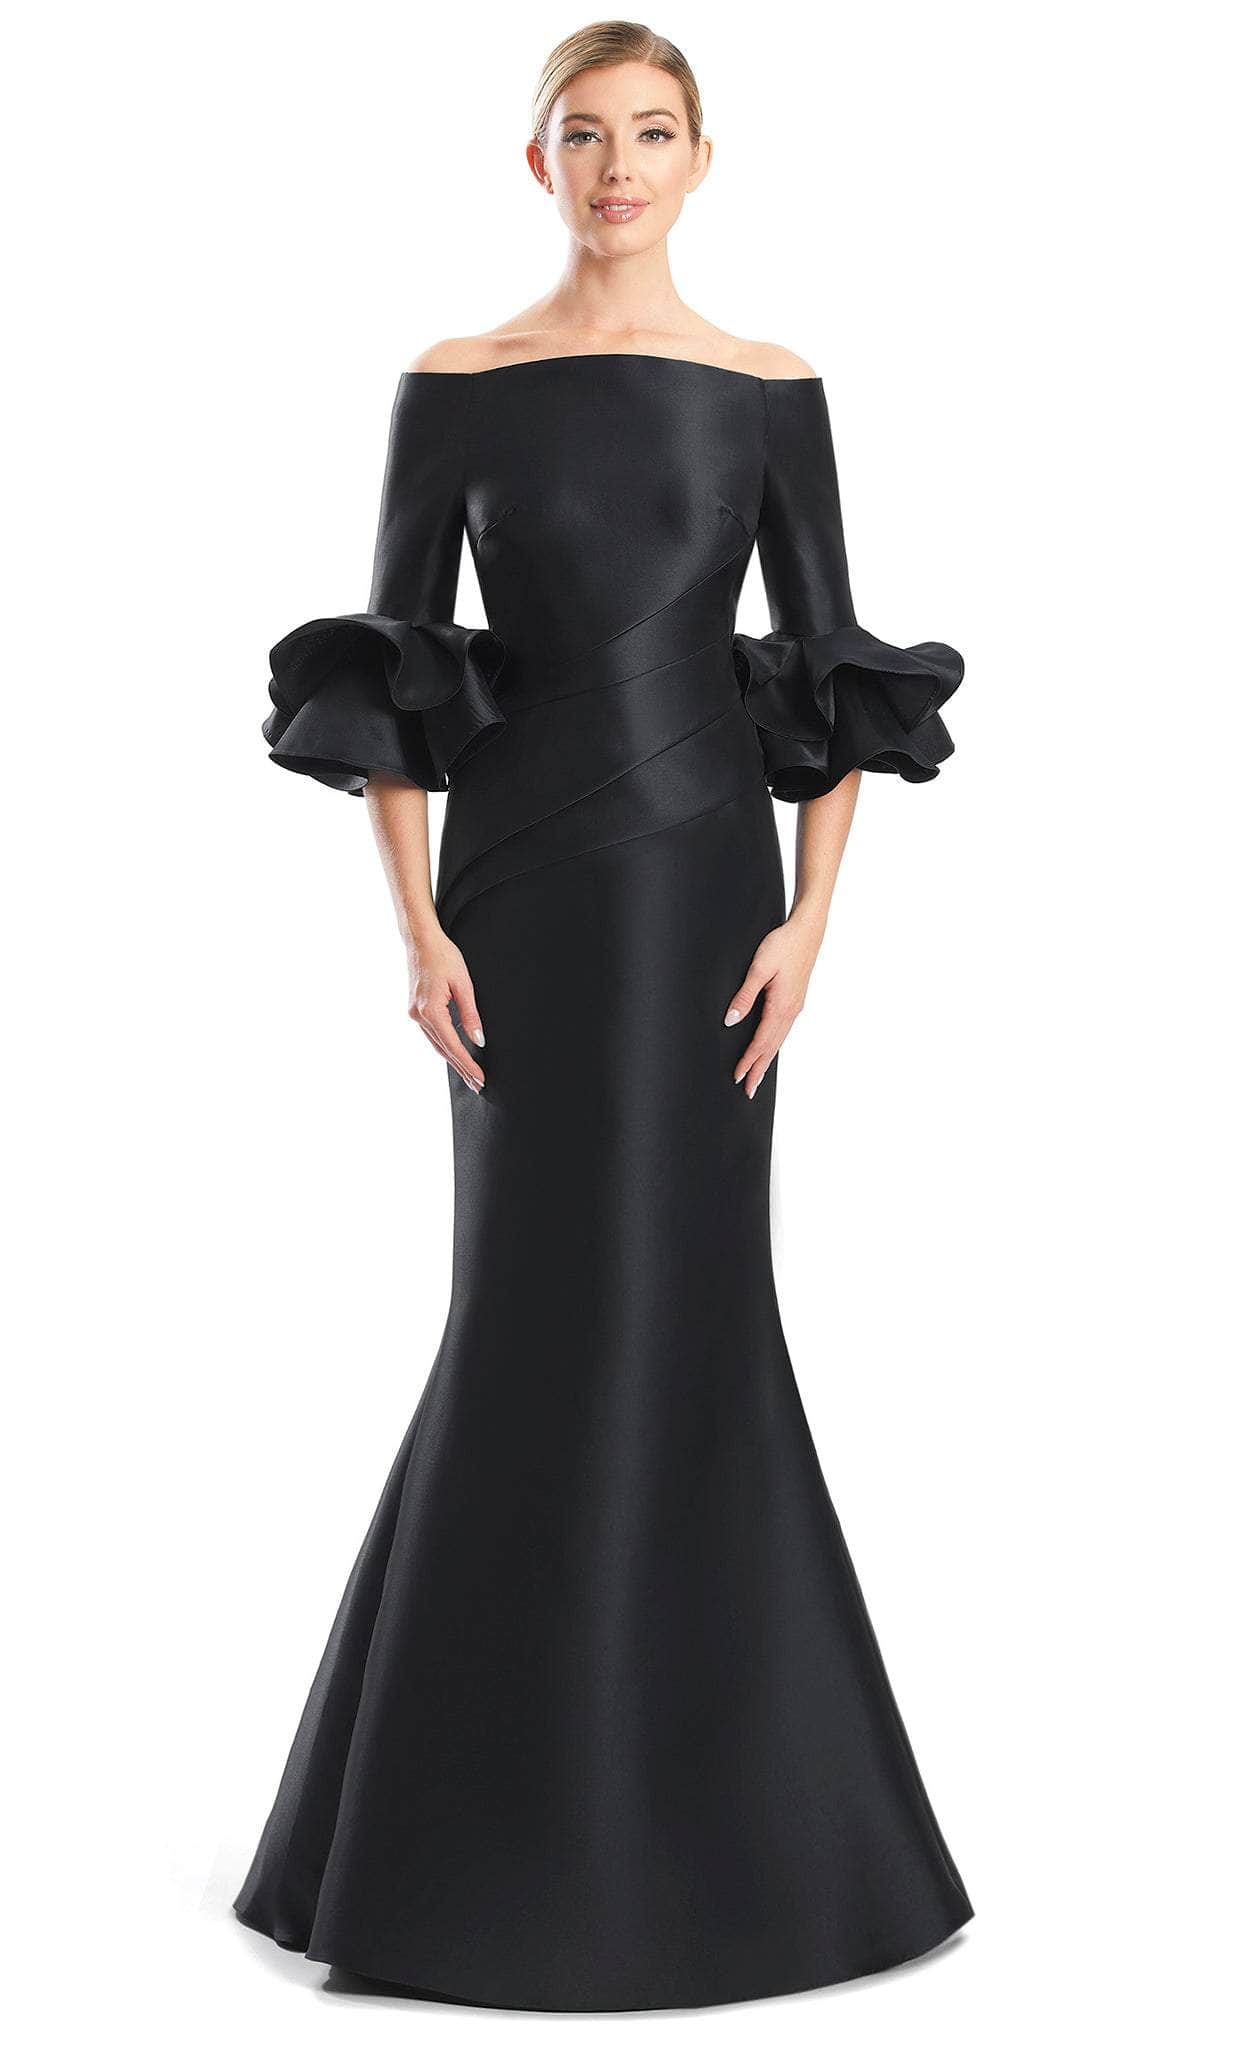 Image of Alexander by Daymor 1758S23 - Ruffled Cuffs Formal Dress